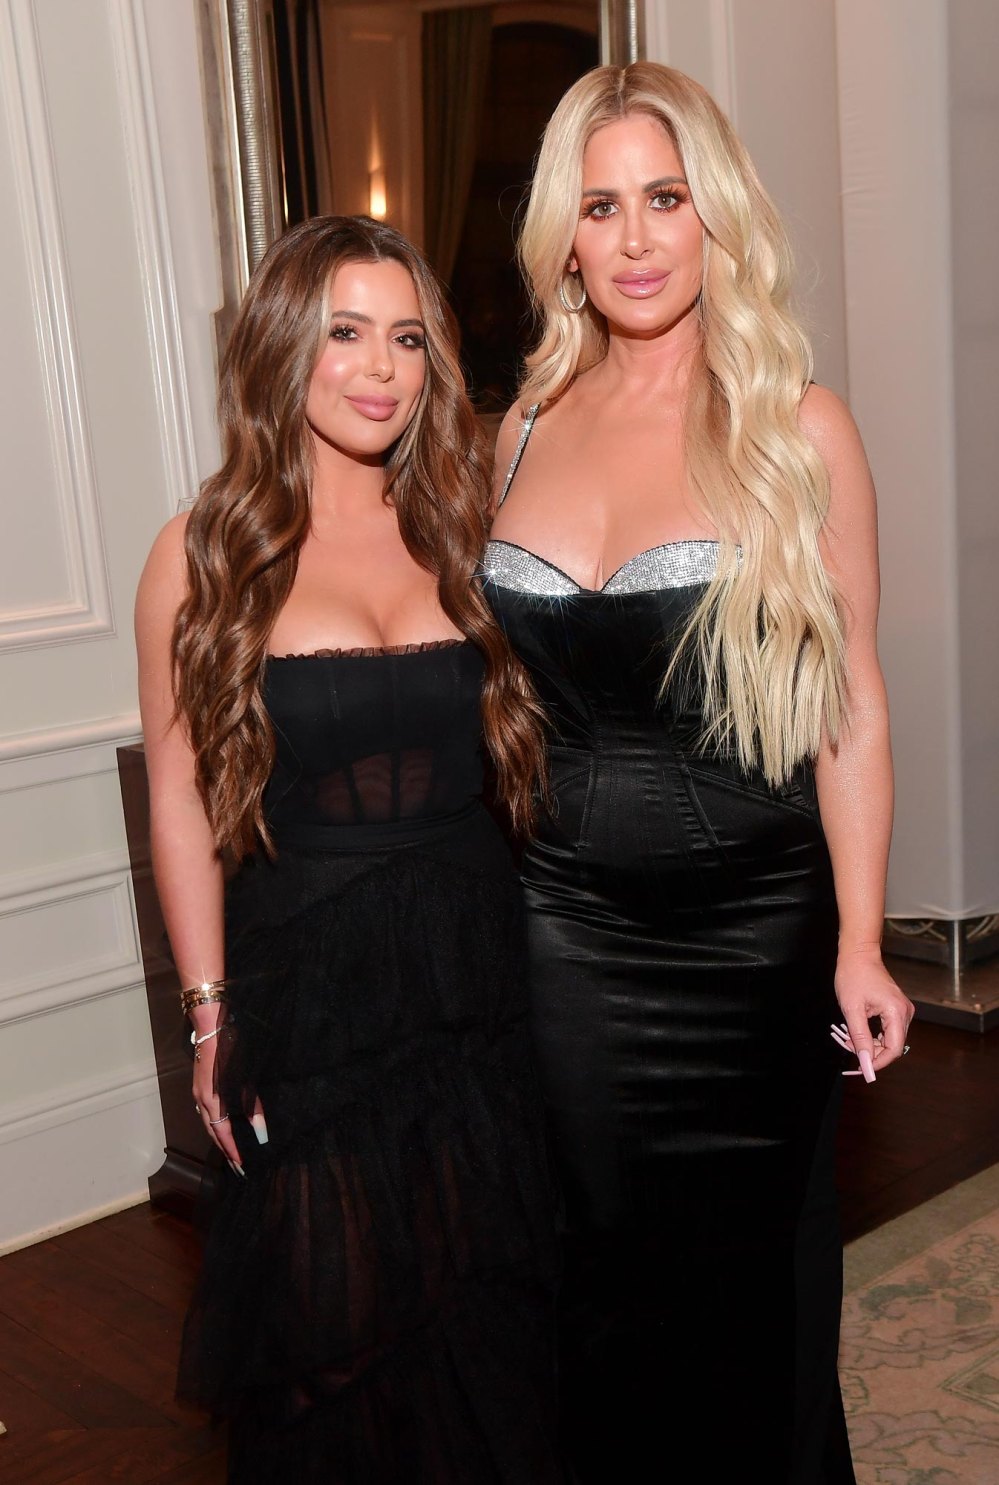 Kim Zolciak and Daughter Brielle Biermanns Land Rover Repossessed Amid Divorce Financial Woes